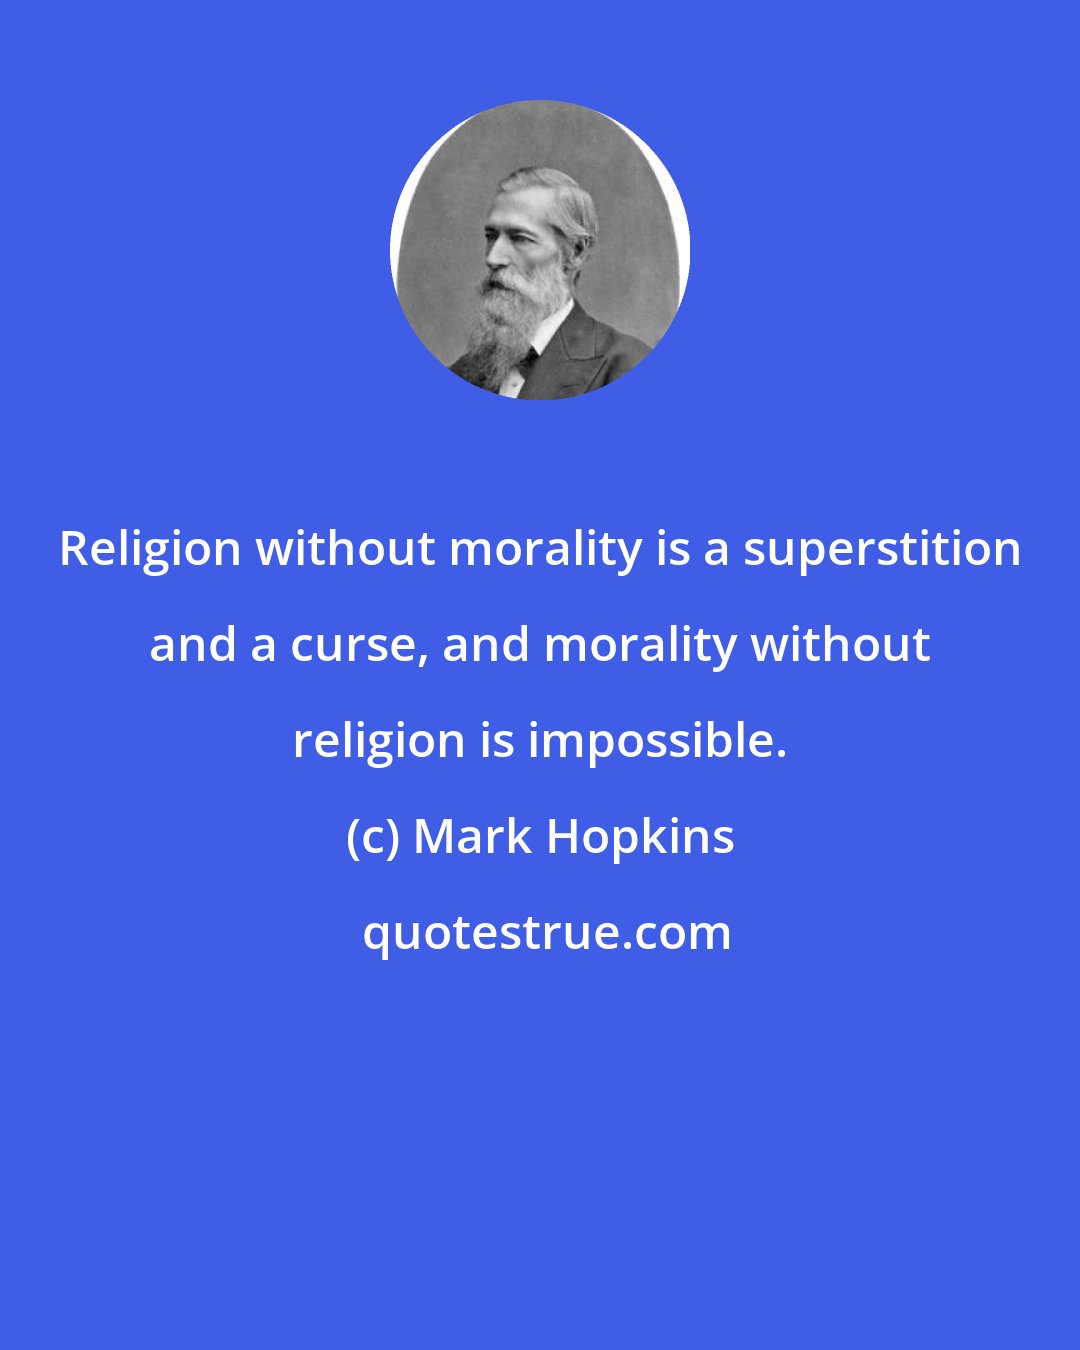 Mark Hopkins: Religion without morality is a superstition and a curse, and morality without religion is impossible.